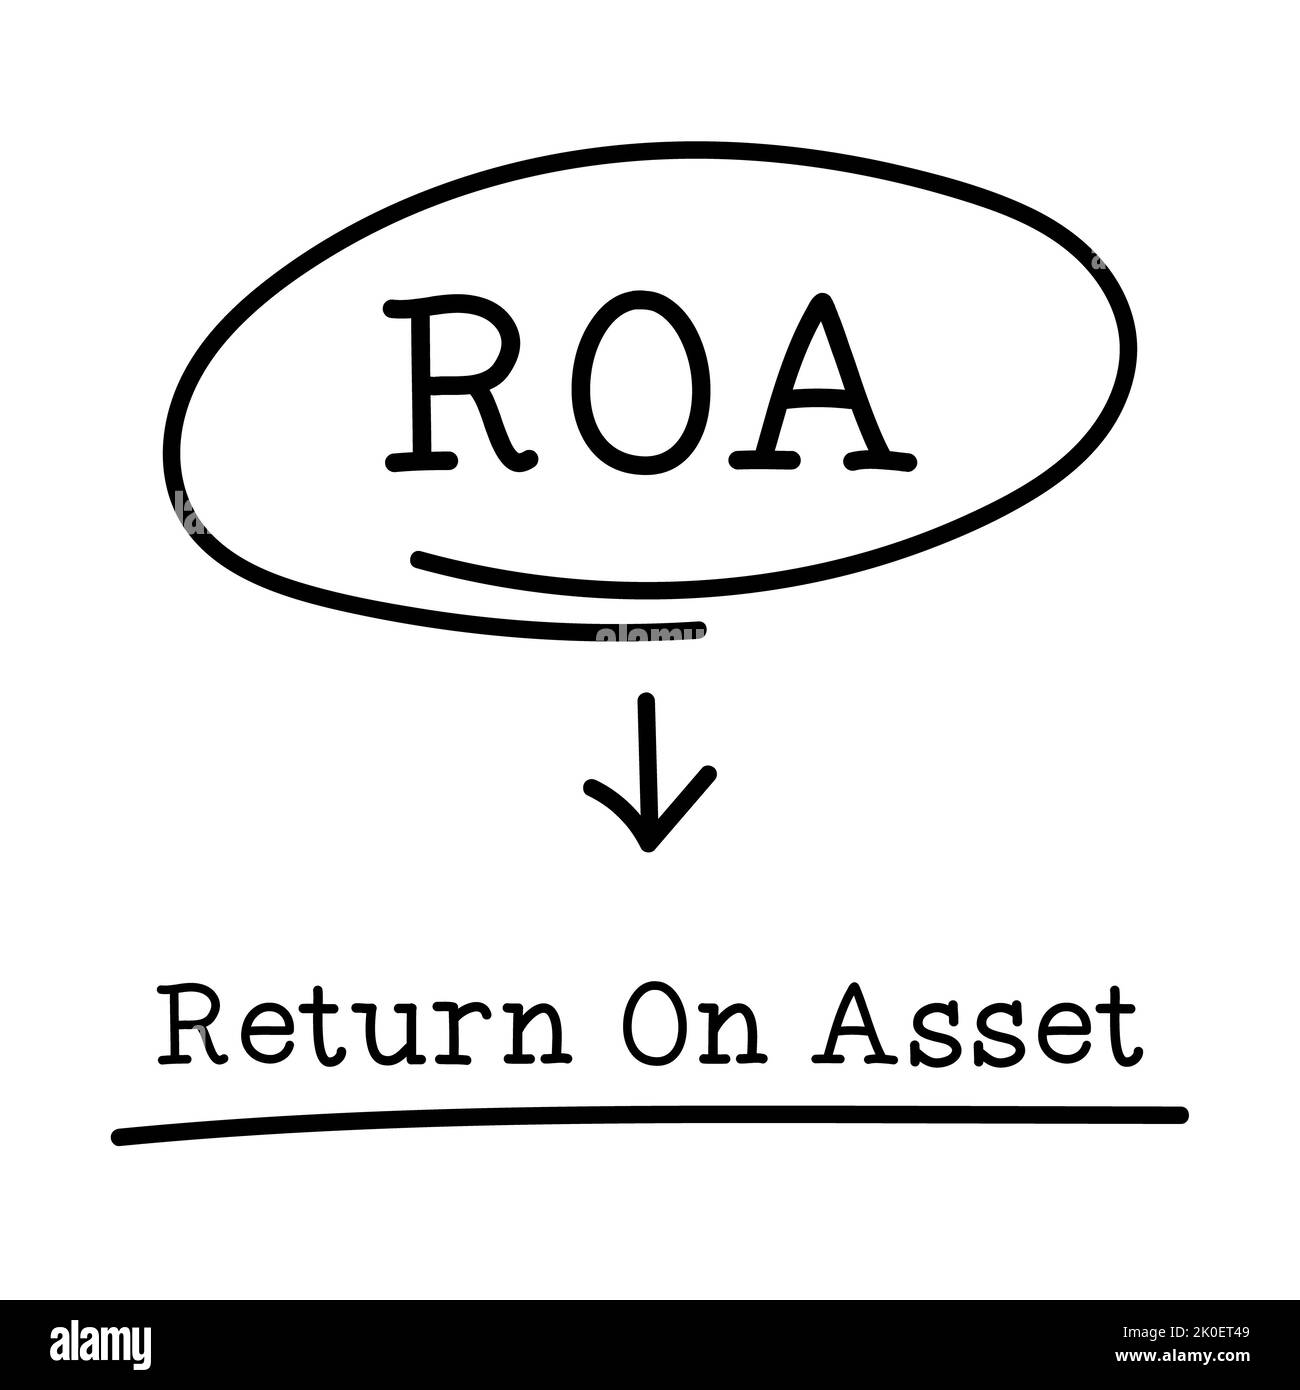 Letter of abbreviation ROA in circle and word Return on assets on white background Stock Photo